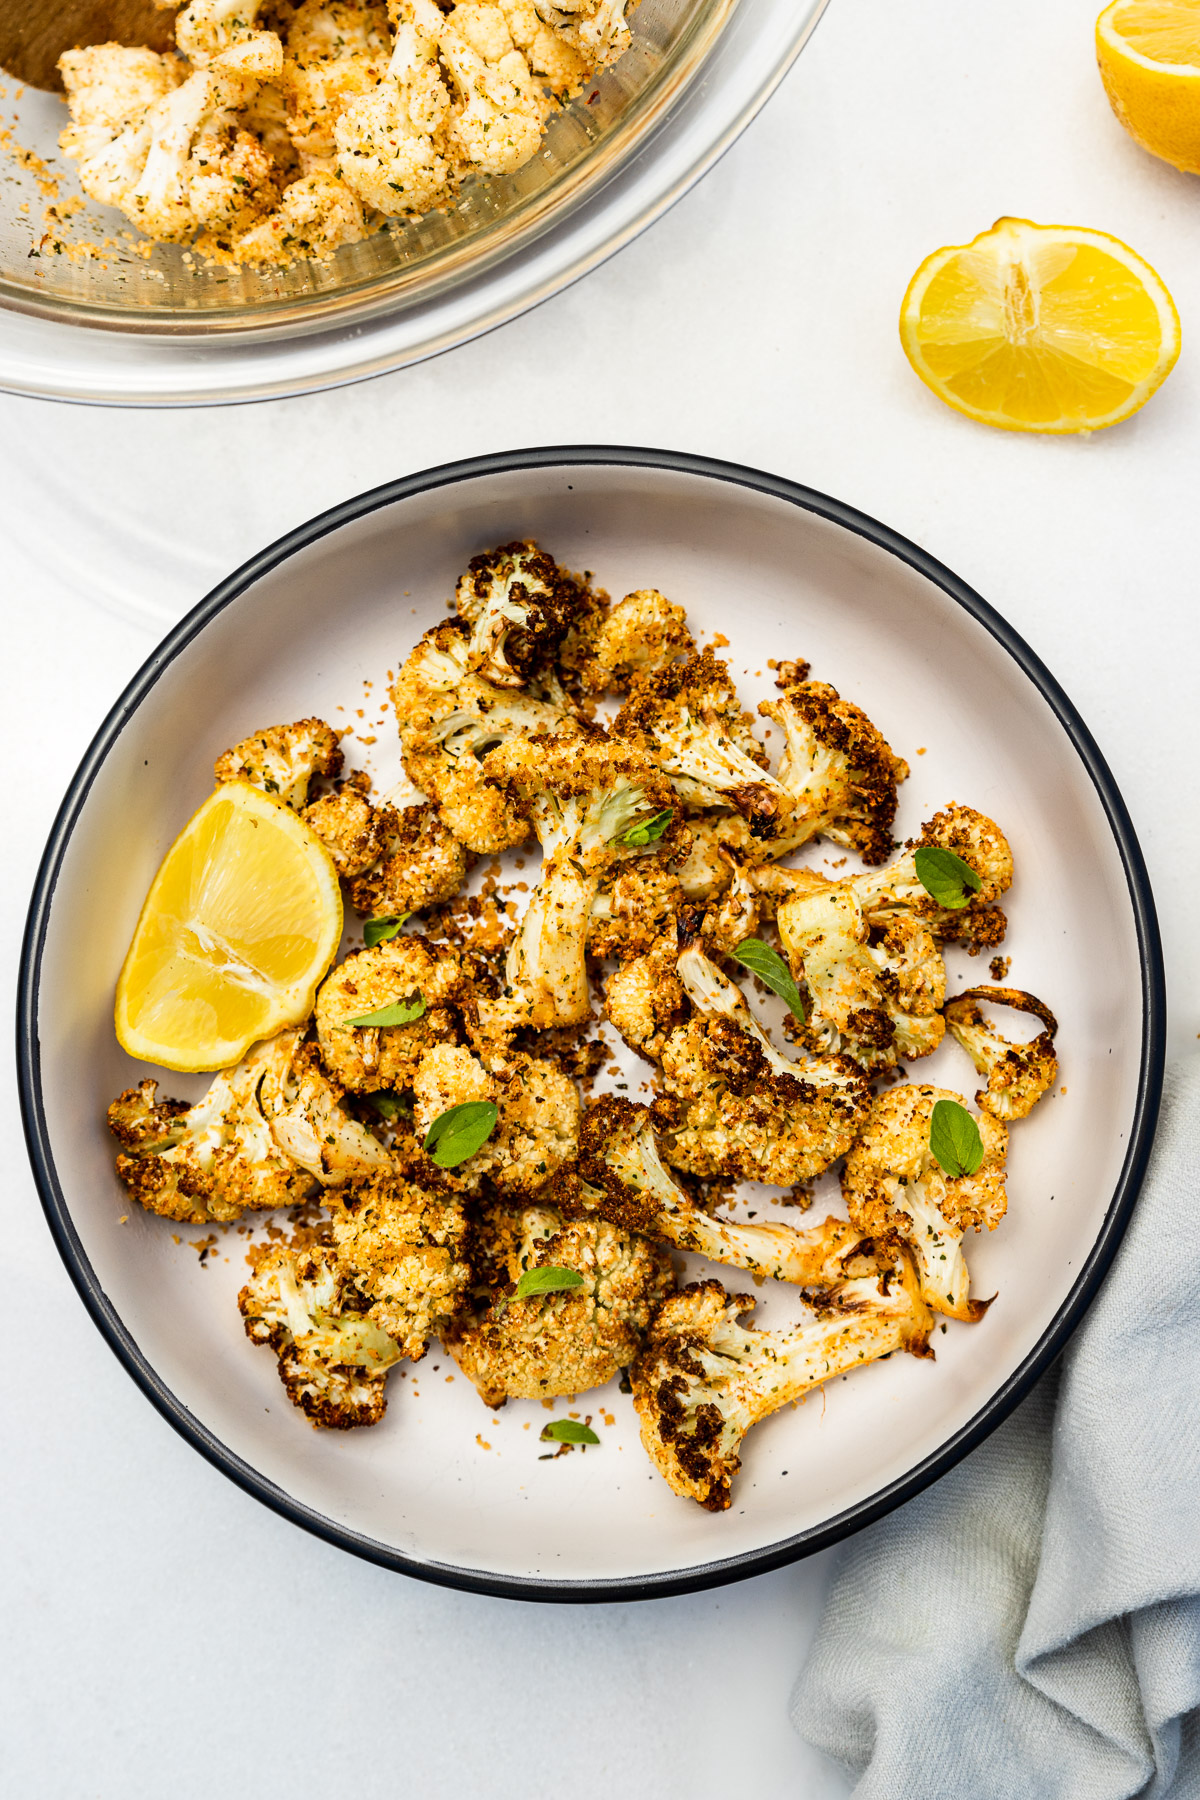 A dish of air fried cauliflower from above with fresh herbs scattered on top and a segment of lemon, with more lemon and a pale blue tea towel.